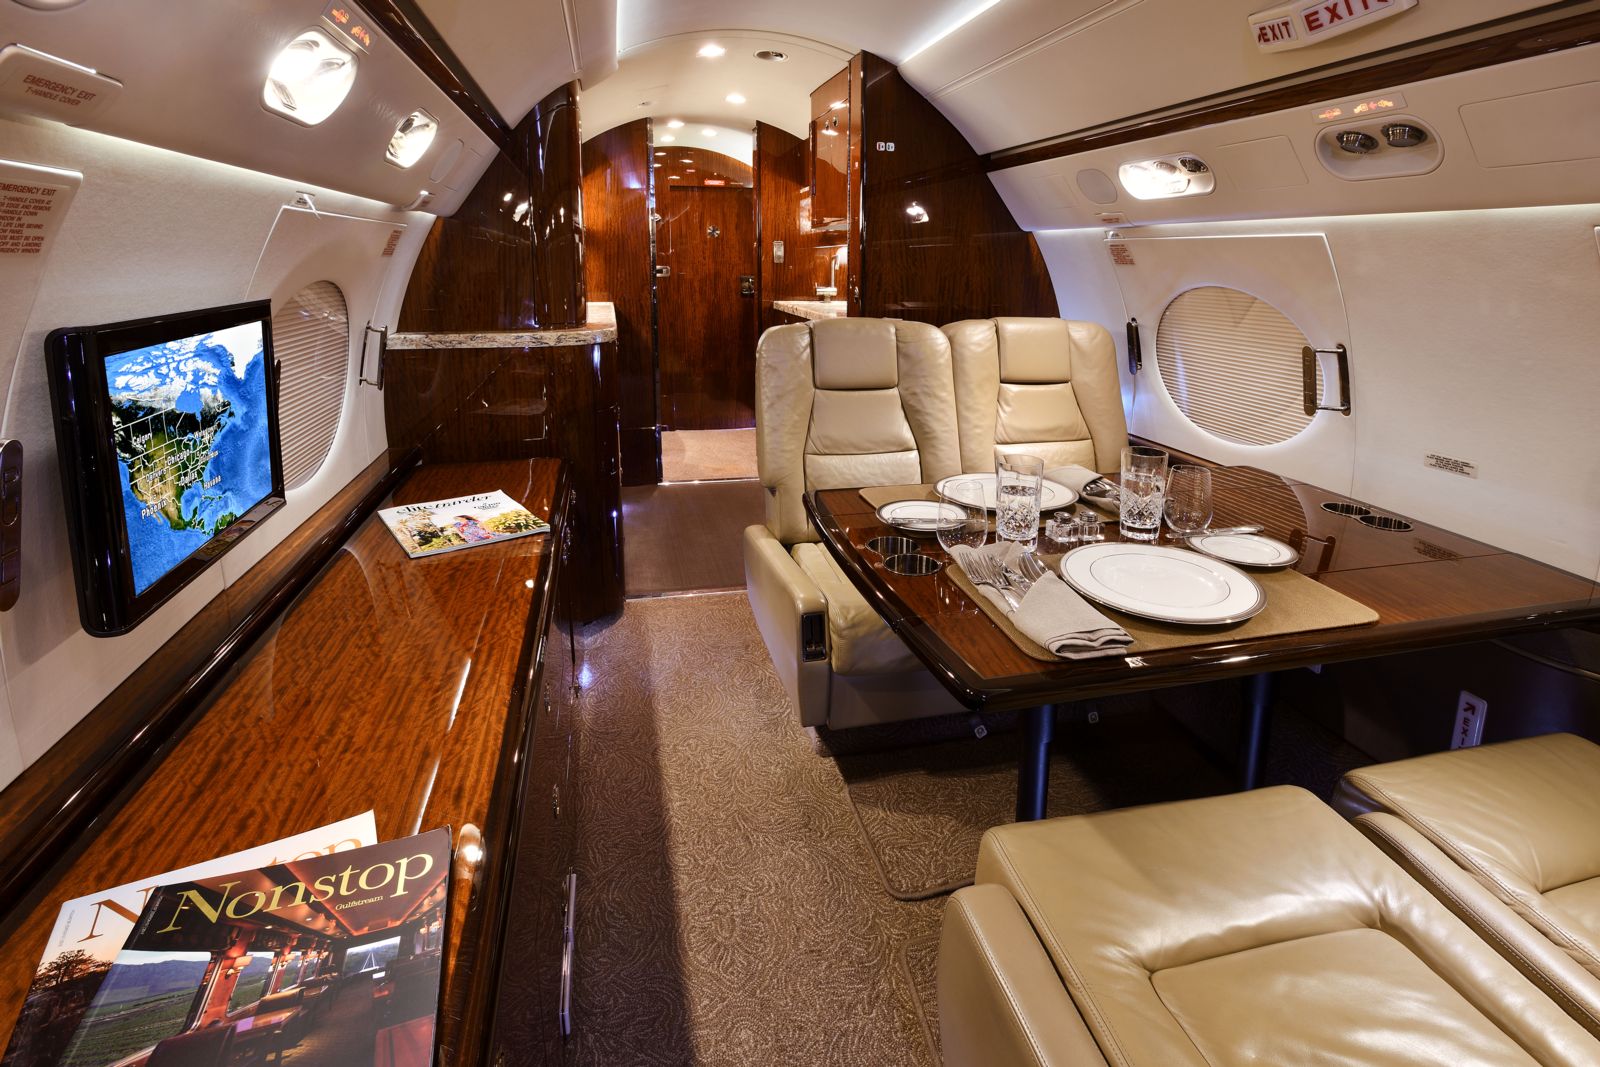 Gulfstream G550  S/N 5502 for sale | gallery image: /userfiles/images/G550_SN_5502/int8c_300.jpg